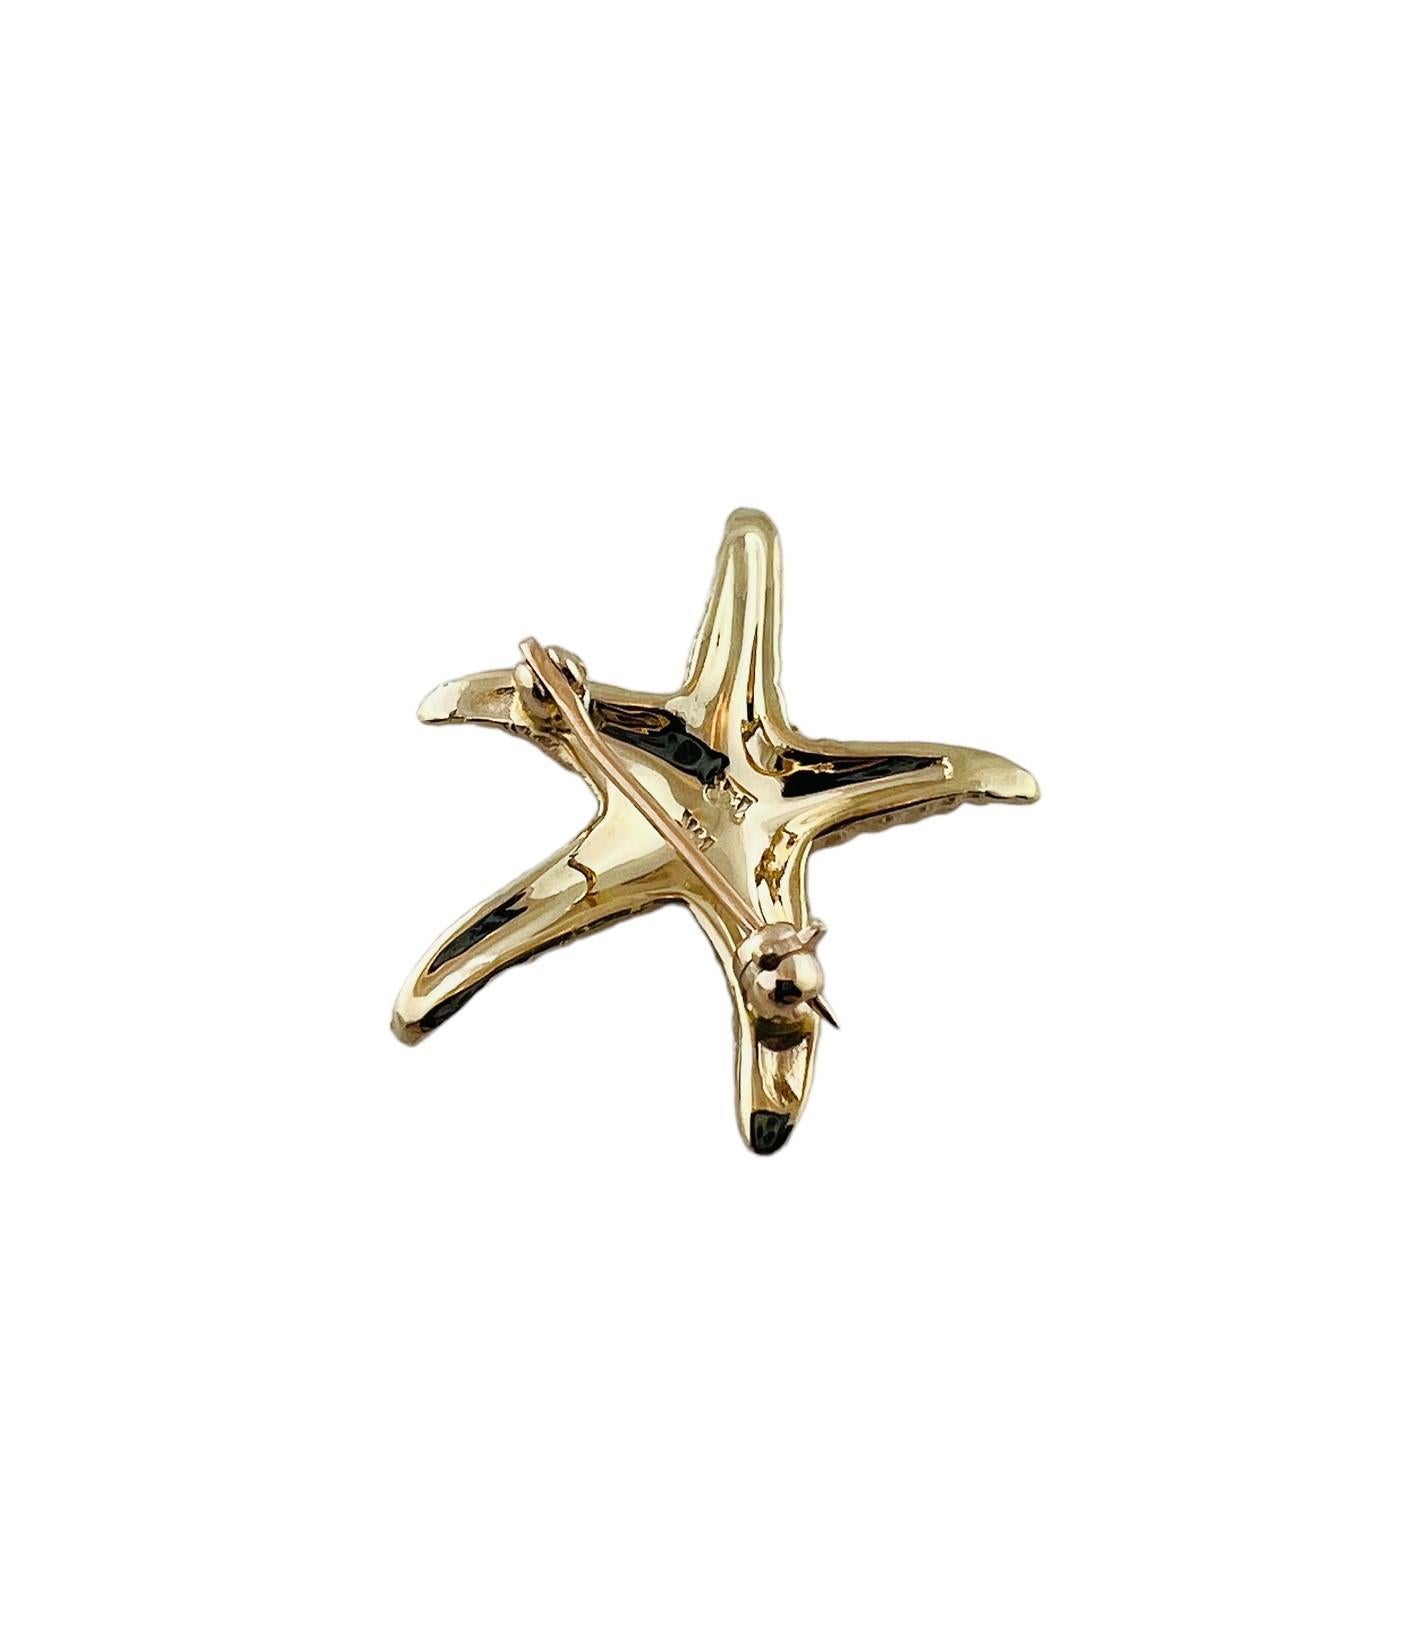 14K Yellow Gold Textured Starfish Pendant

This beautiful starfish pin is set in 14K yellow gold

Pin measures approx. 26.9 mm x 23.0 mm x 2.9 mm 

4.2 grams / 2.7 dwt

Stamped 14K

Very good preowned condition. 

Will be shipped priority mail with